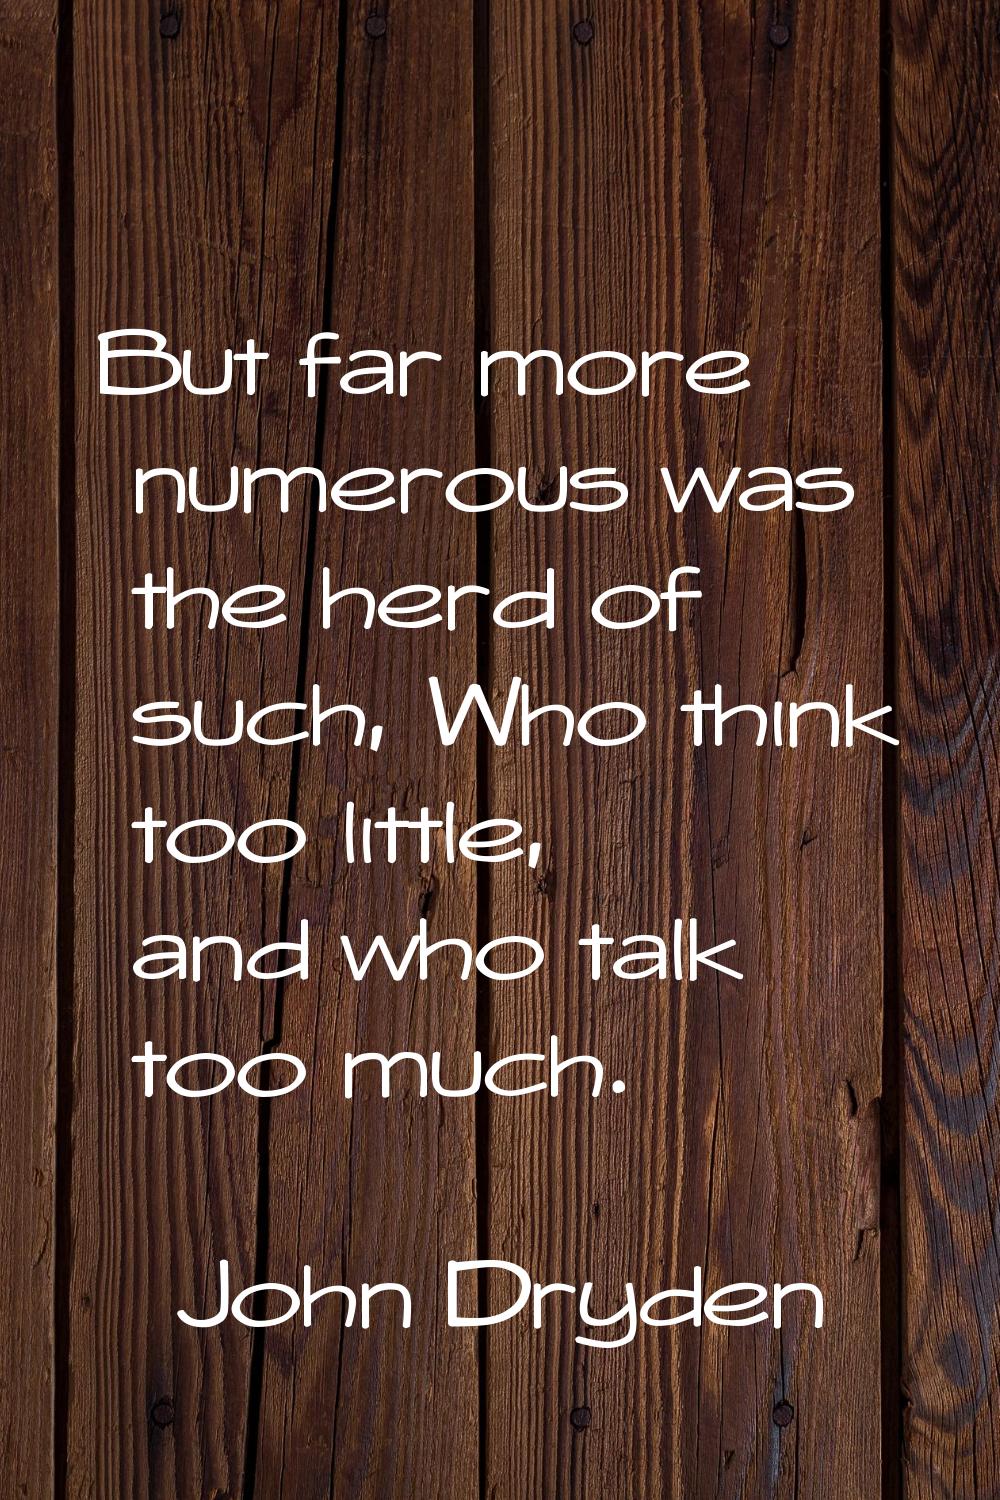 But far more numerous was the herd of such, Who think too little, and who talk too much.